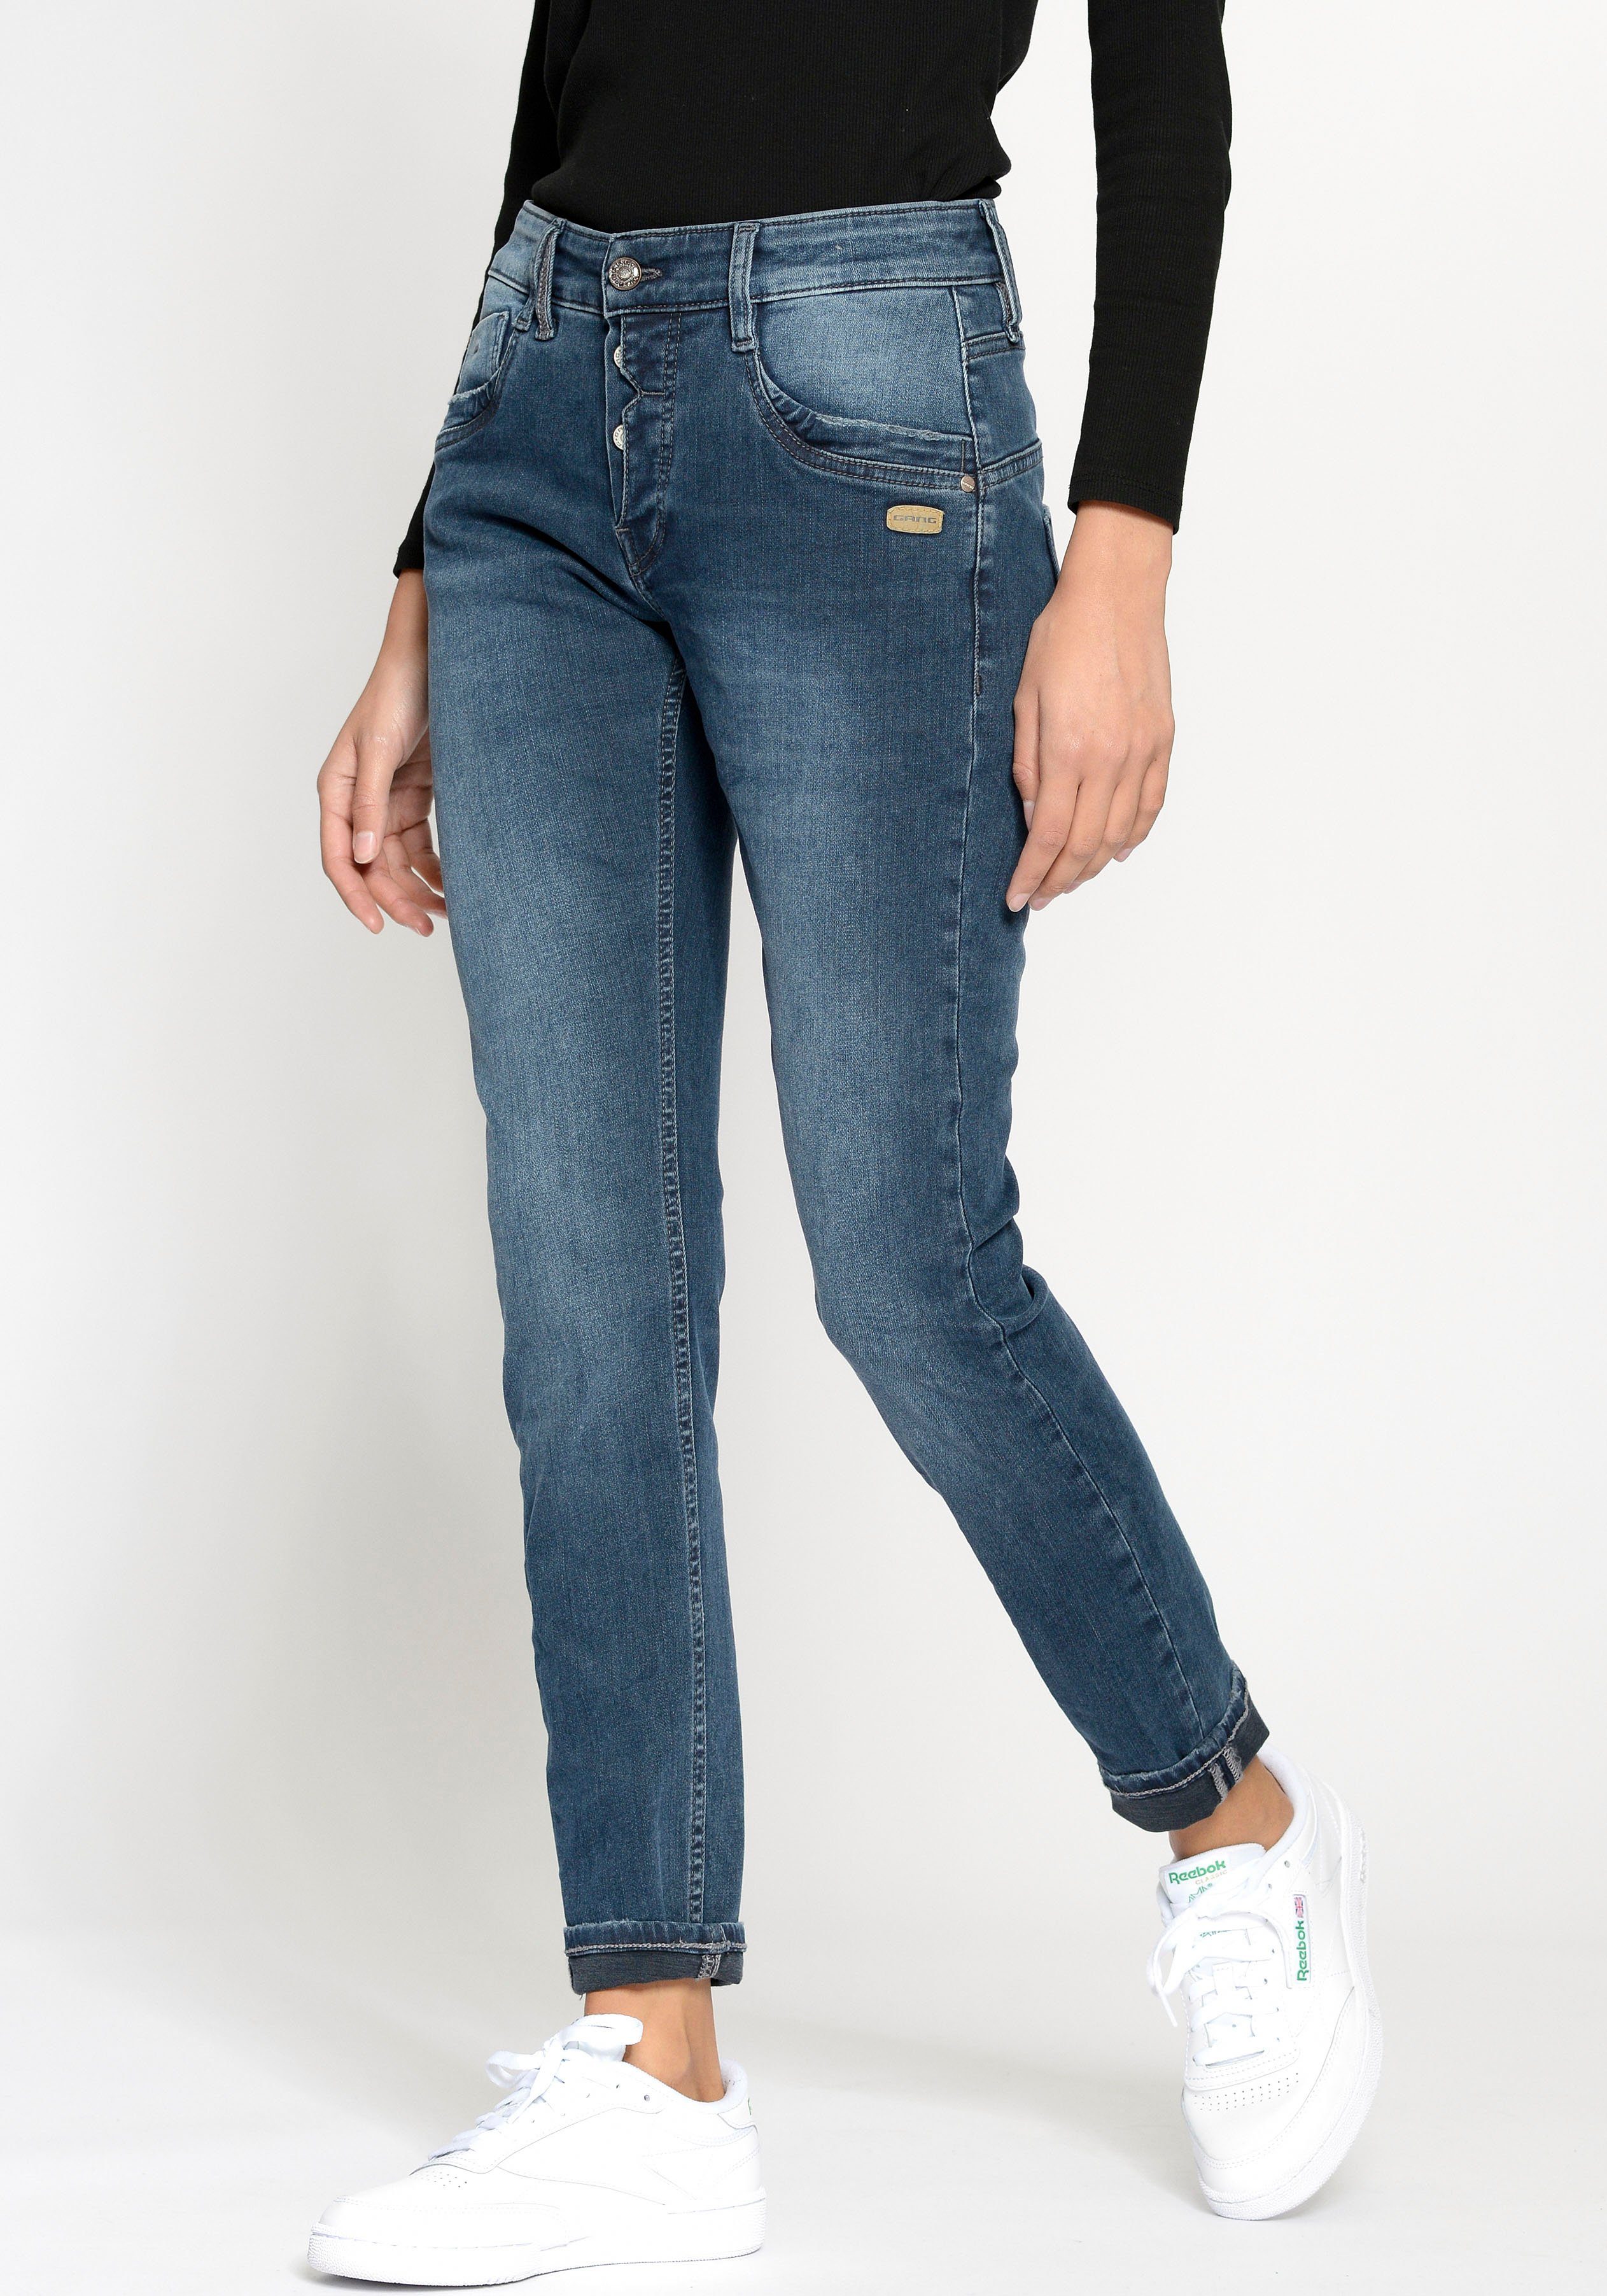 GANG Relax-fit-Jeans 94Gerda mit halb offener Knopfleiste striking smooth | Stretchjeans